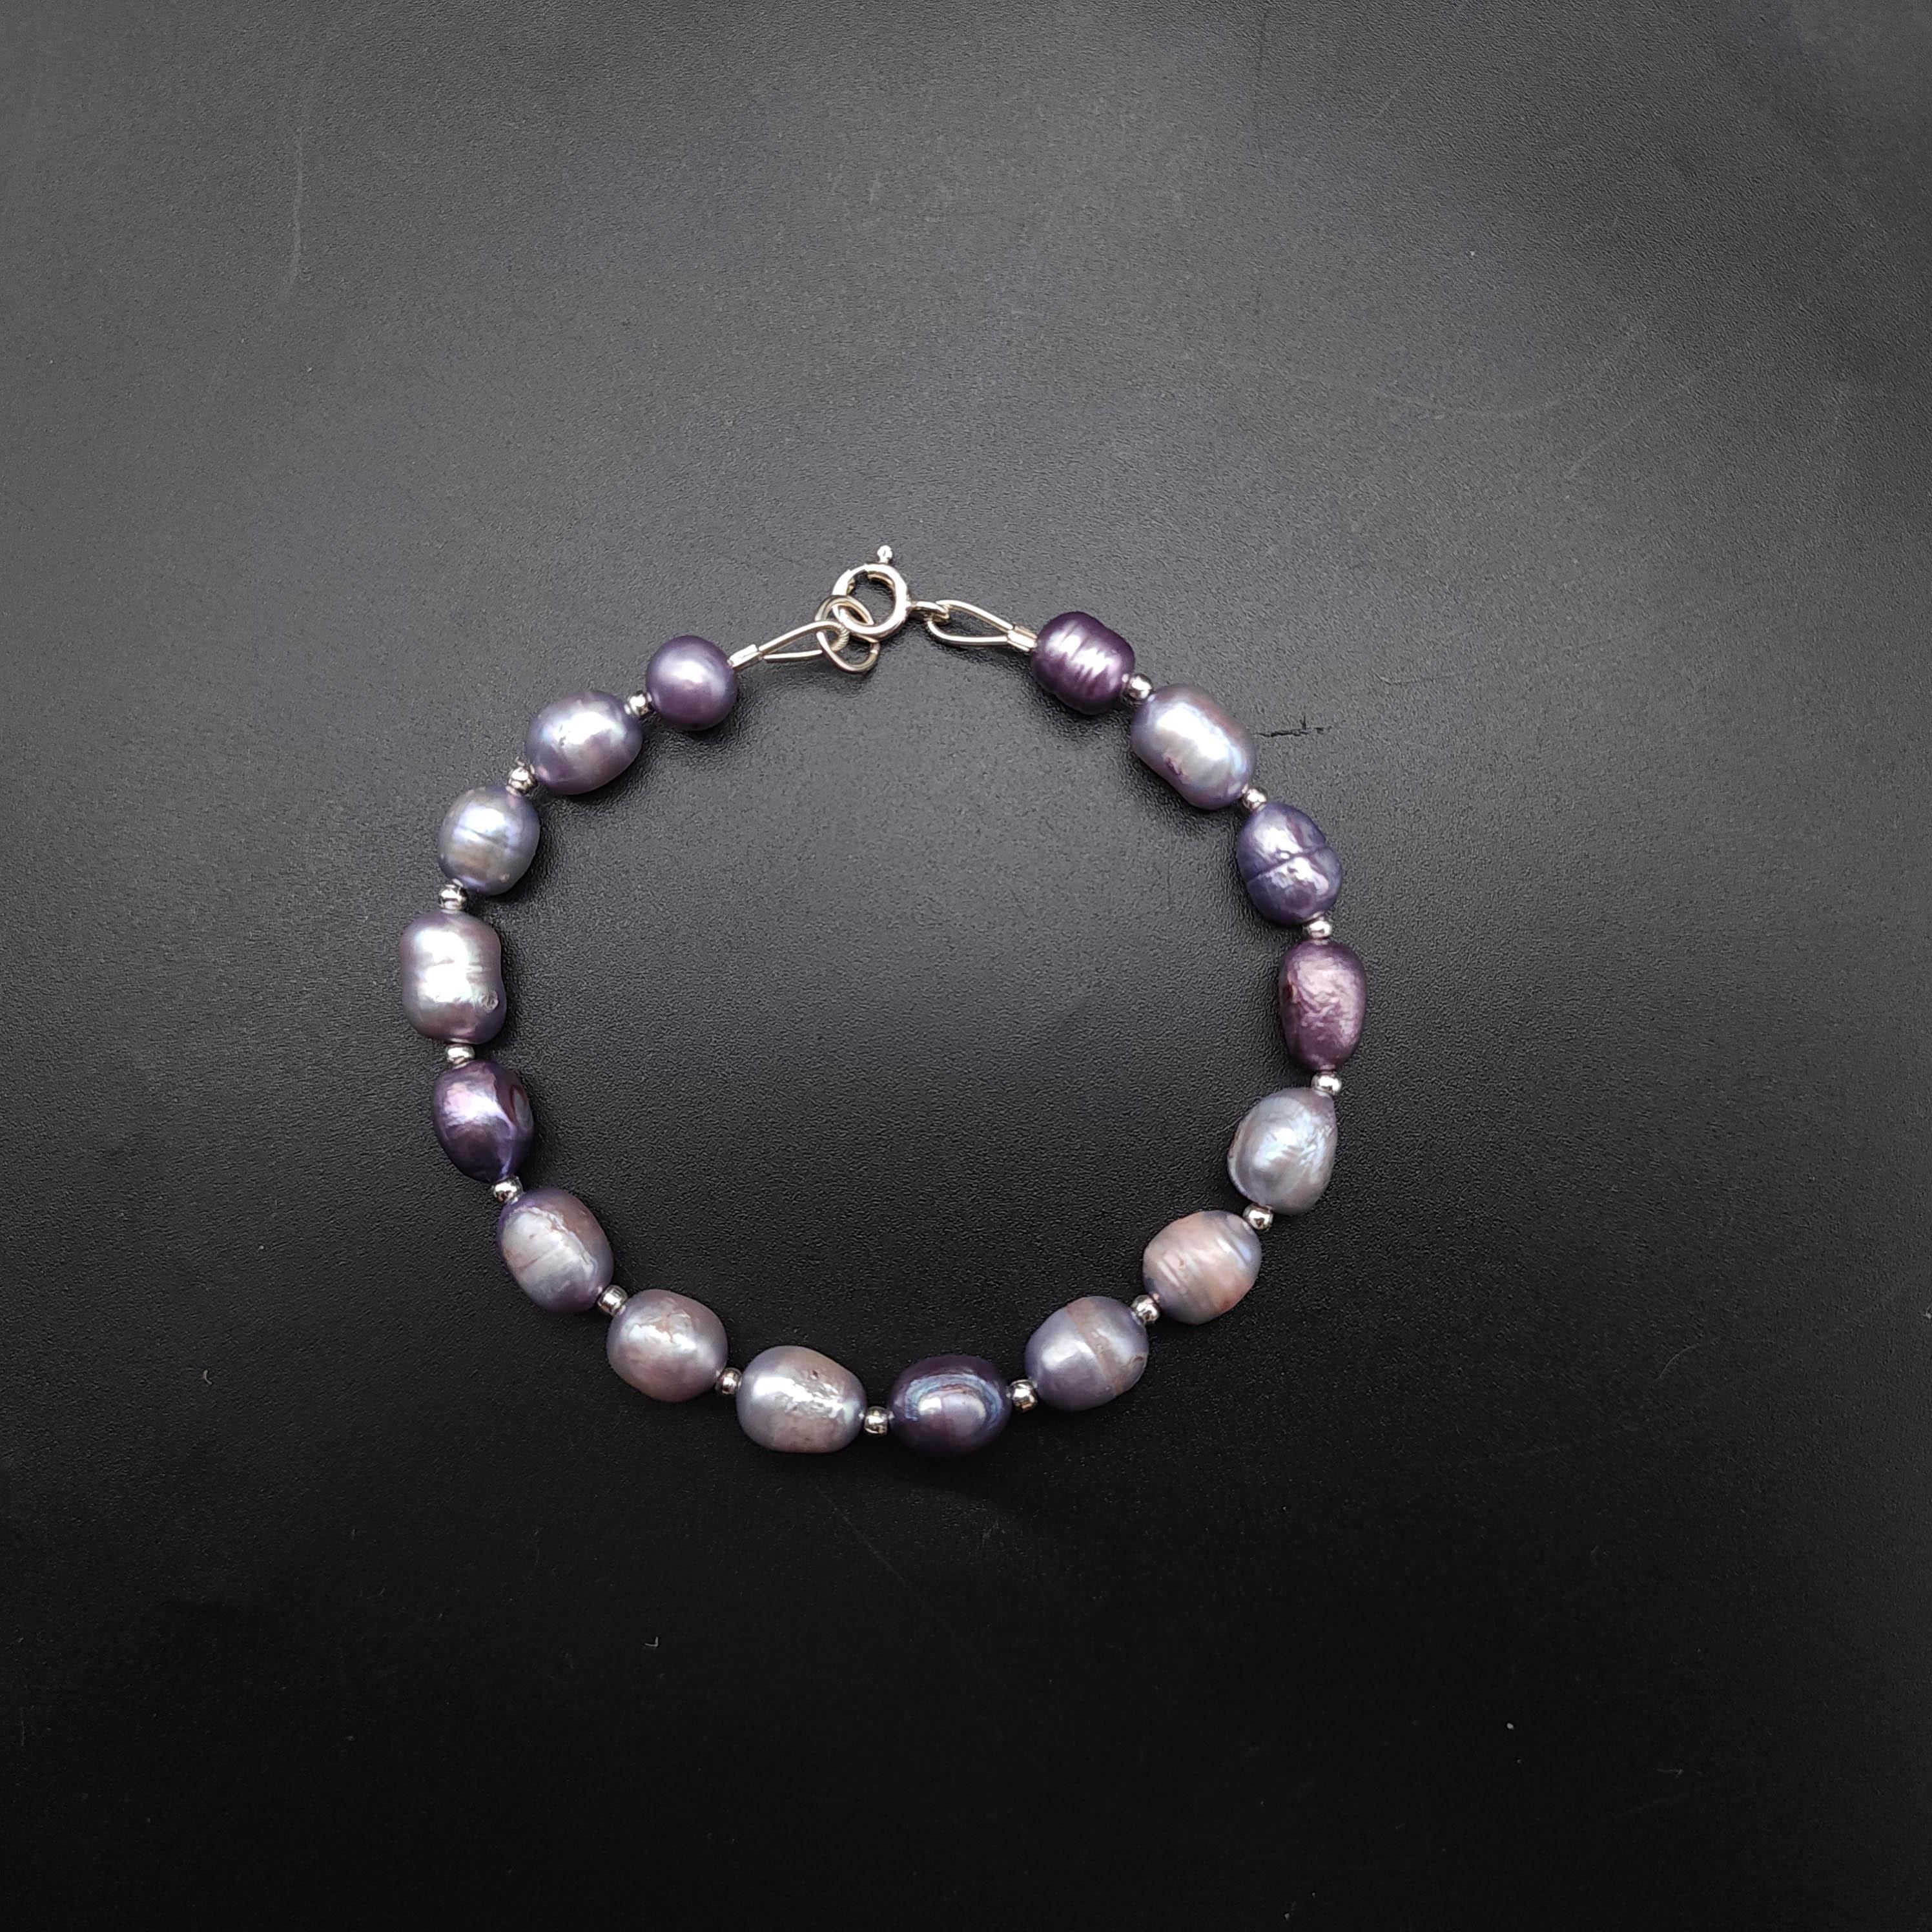 Vintage Lavender Pearl Bead Bracelet with Sterling Silver Accents, Clasp In Excellent Condition For Sale In Milford, DE